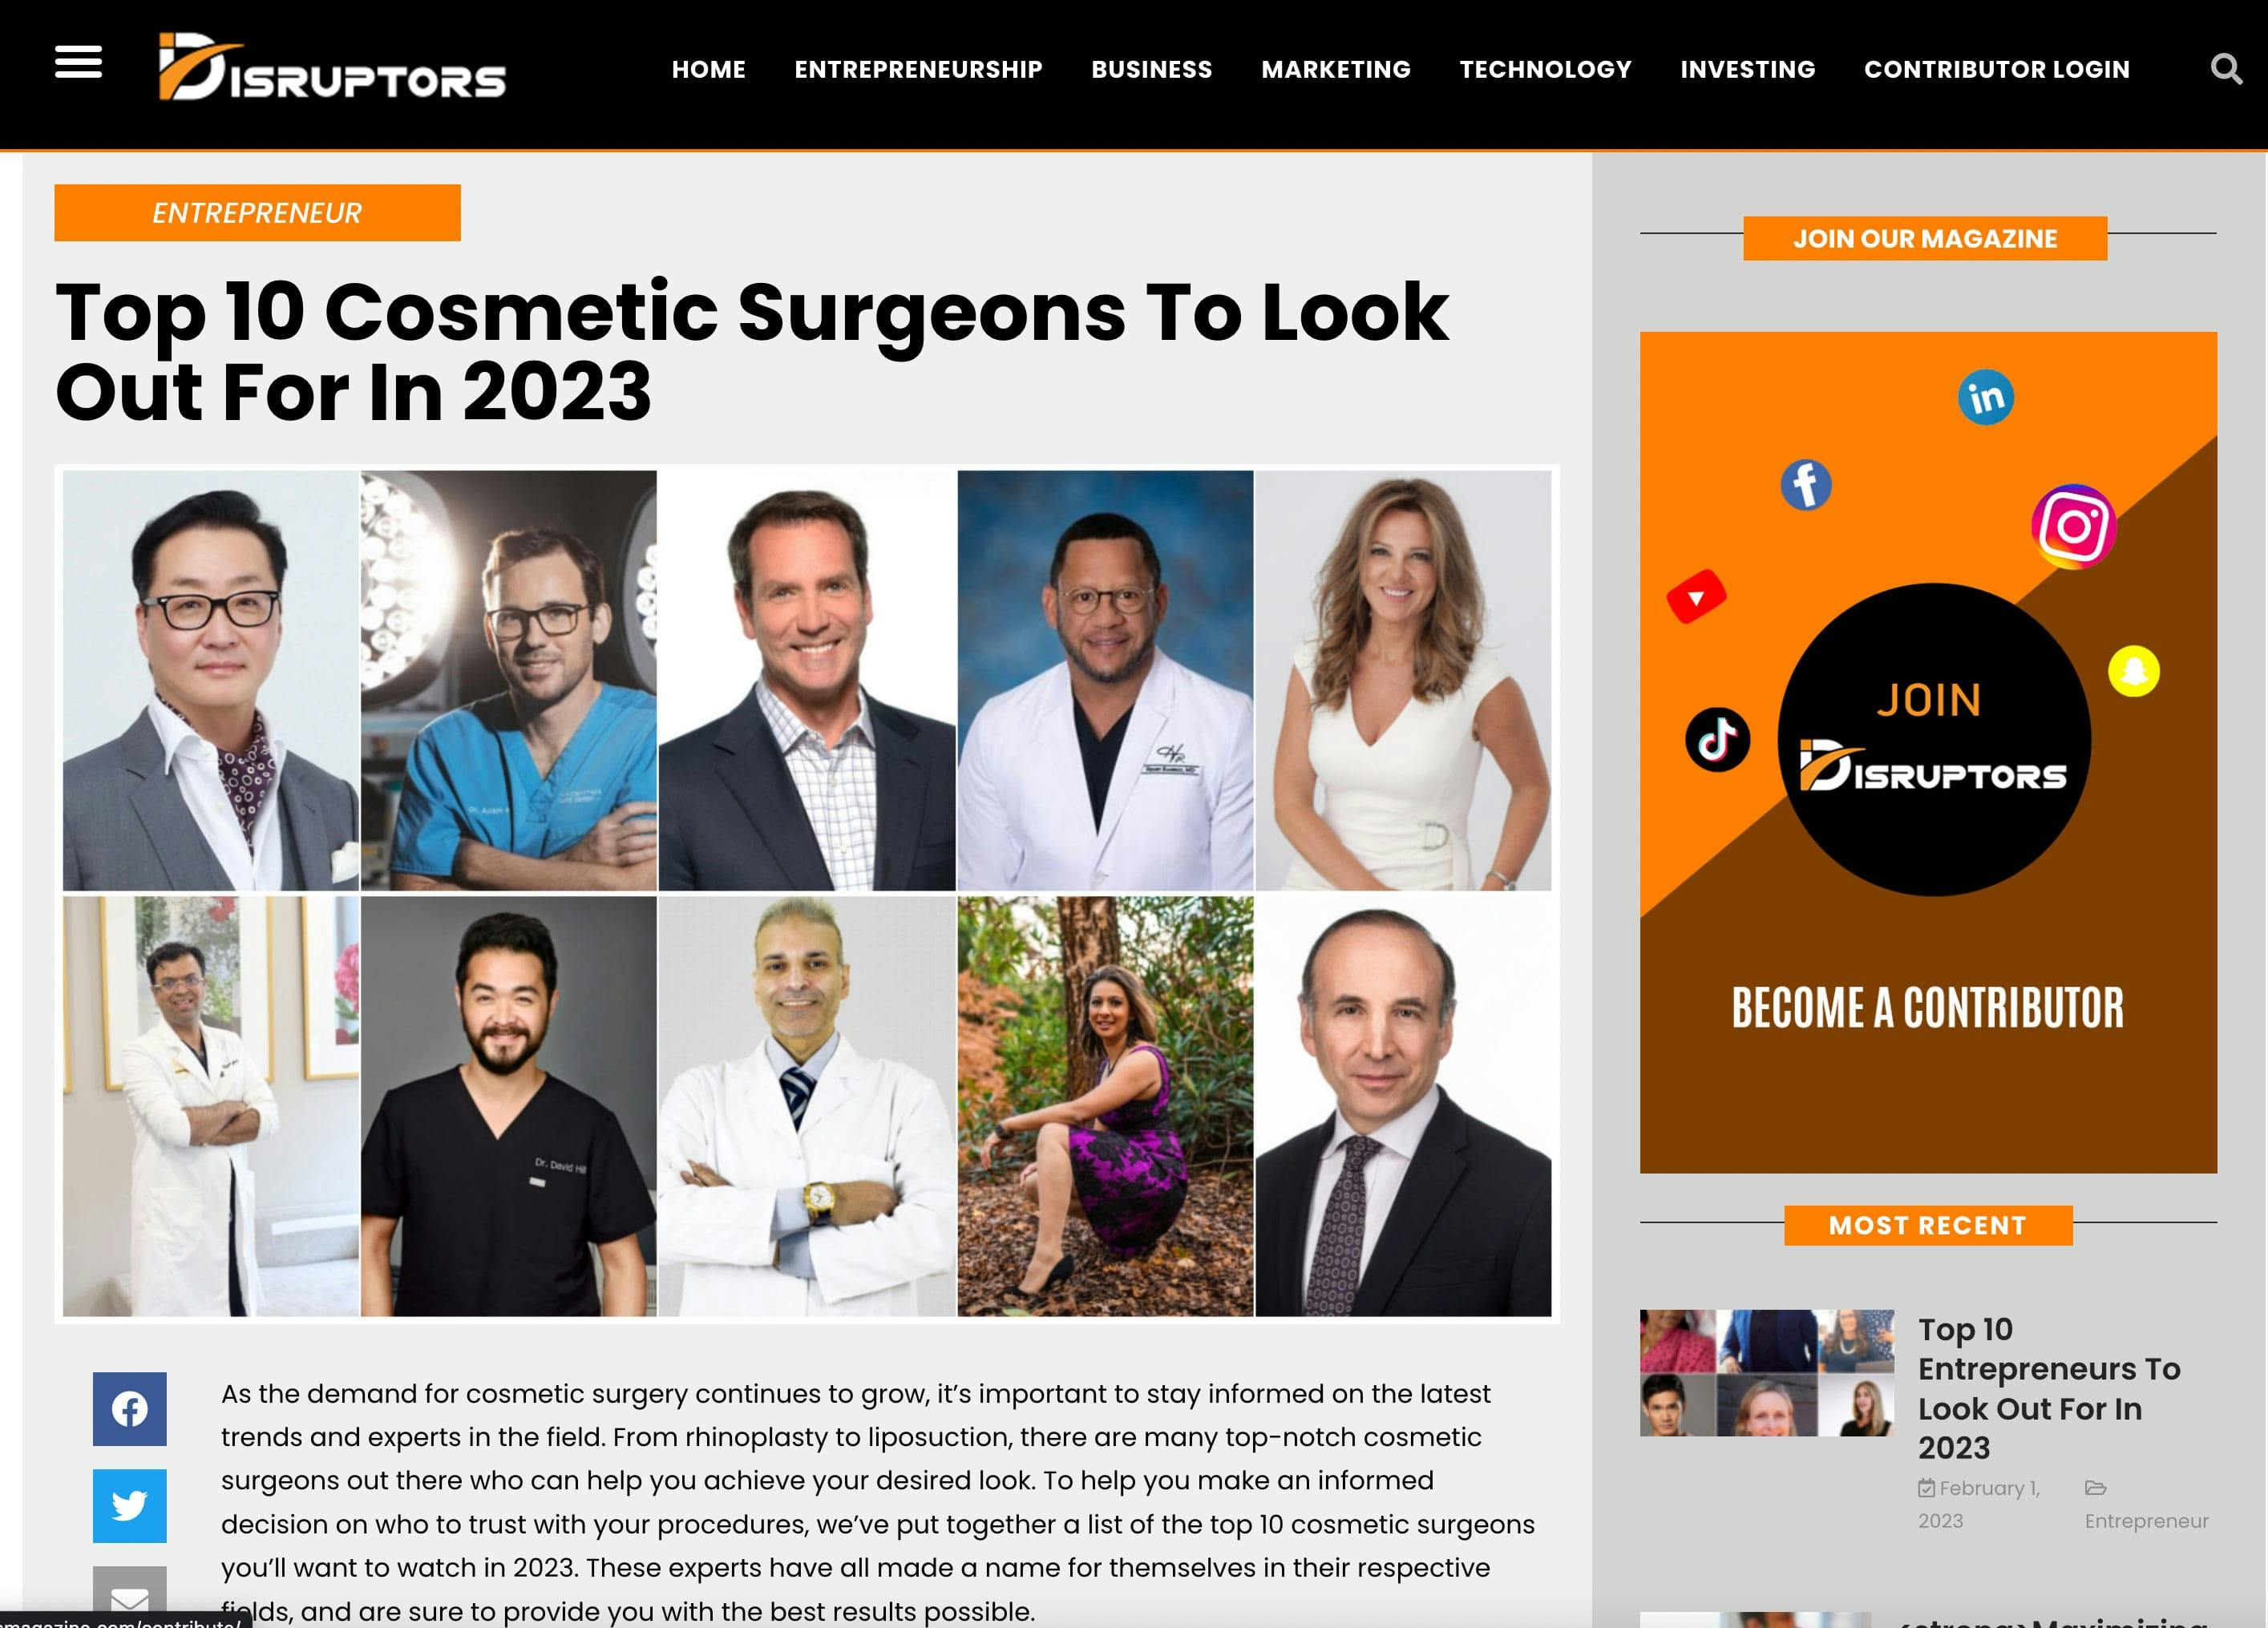 Top 10 Cosmetic Surgeons To Look Out For In 2023